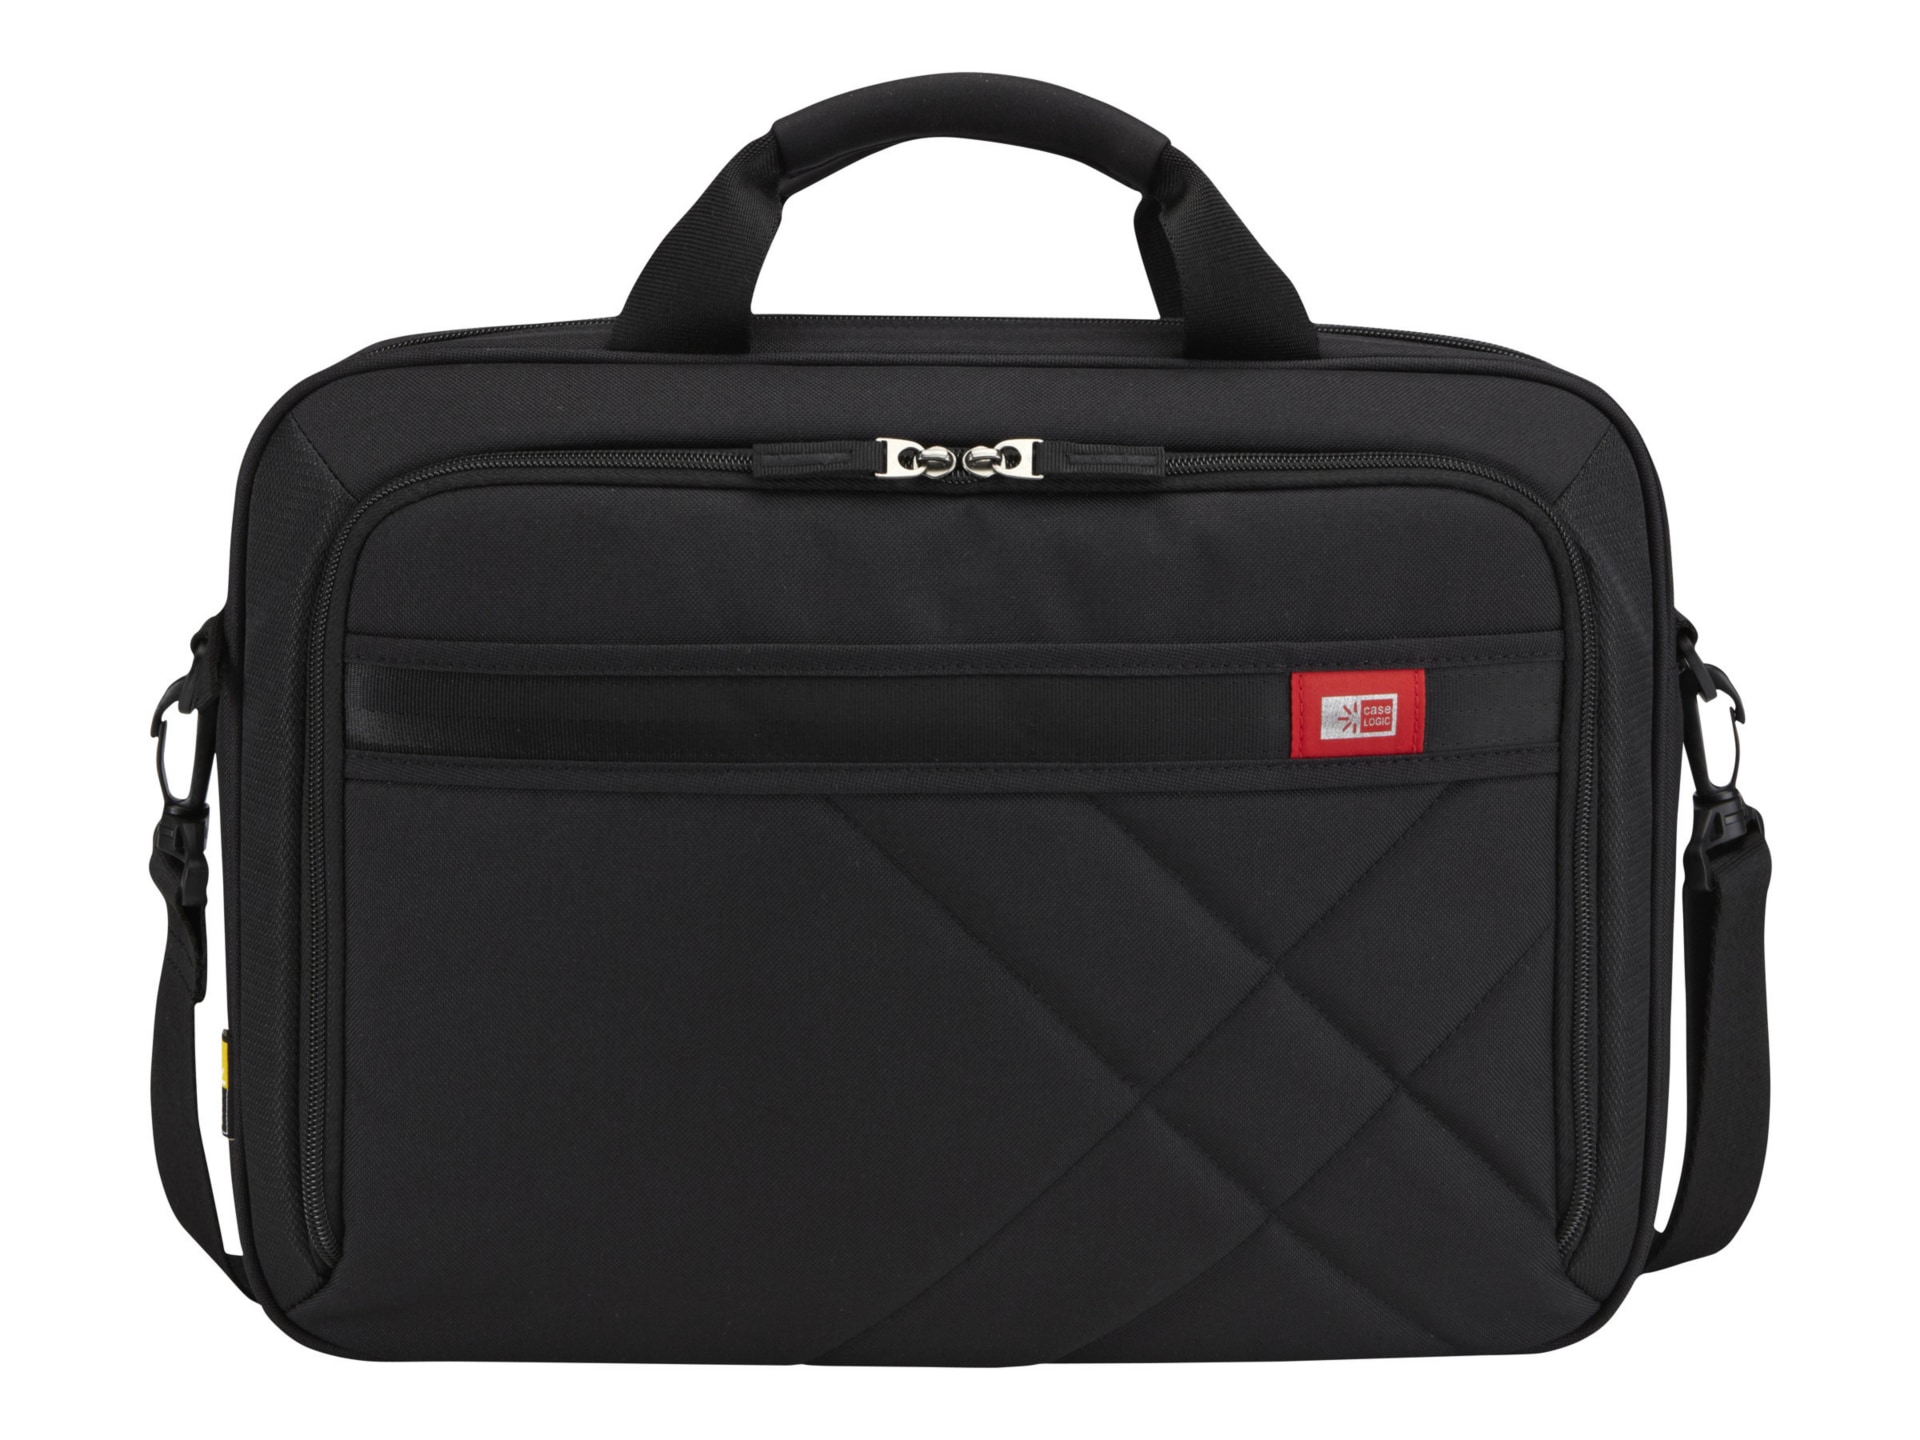 Case Logic 15" Laptop and Tablet Case - notebook carrying case